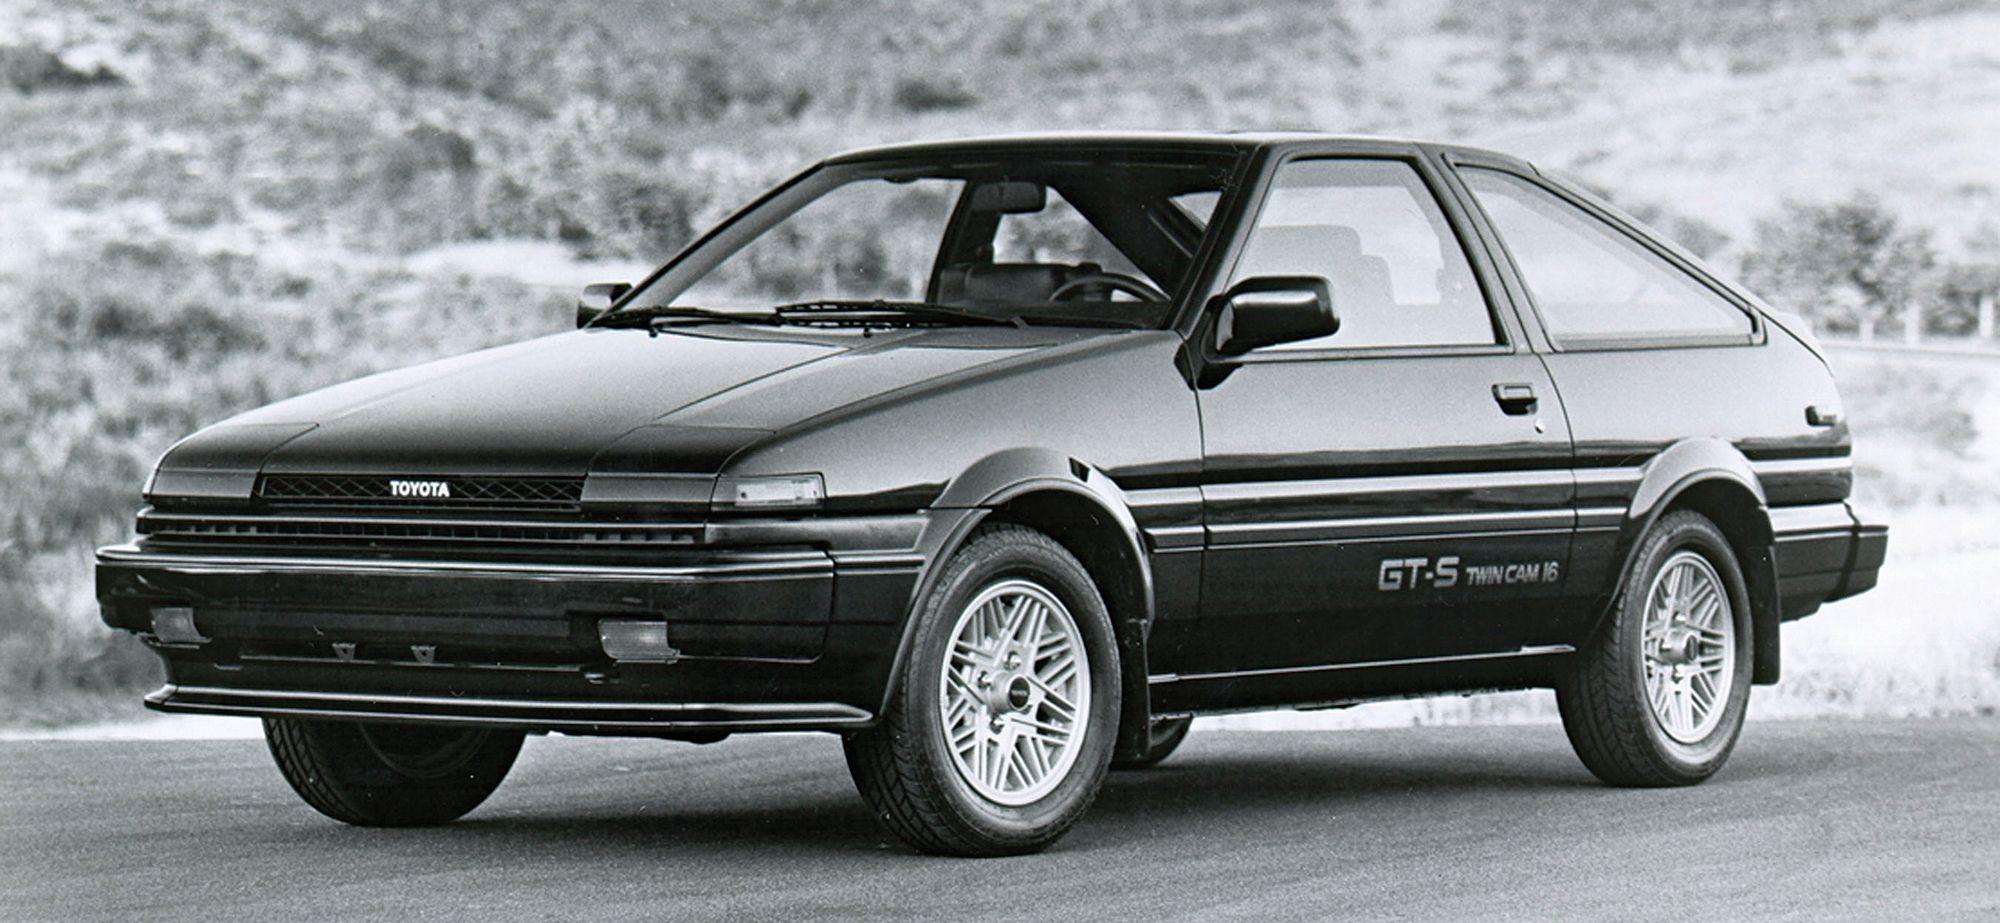 AE86 Toyota Logo - Vintage Views: Toyota AE86 Corolla GT-S | Articles | Grassroots ...